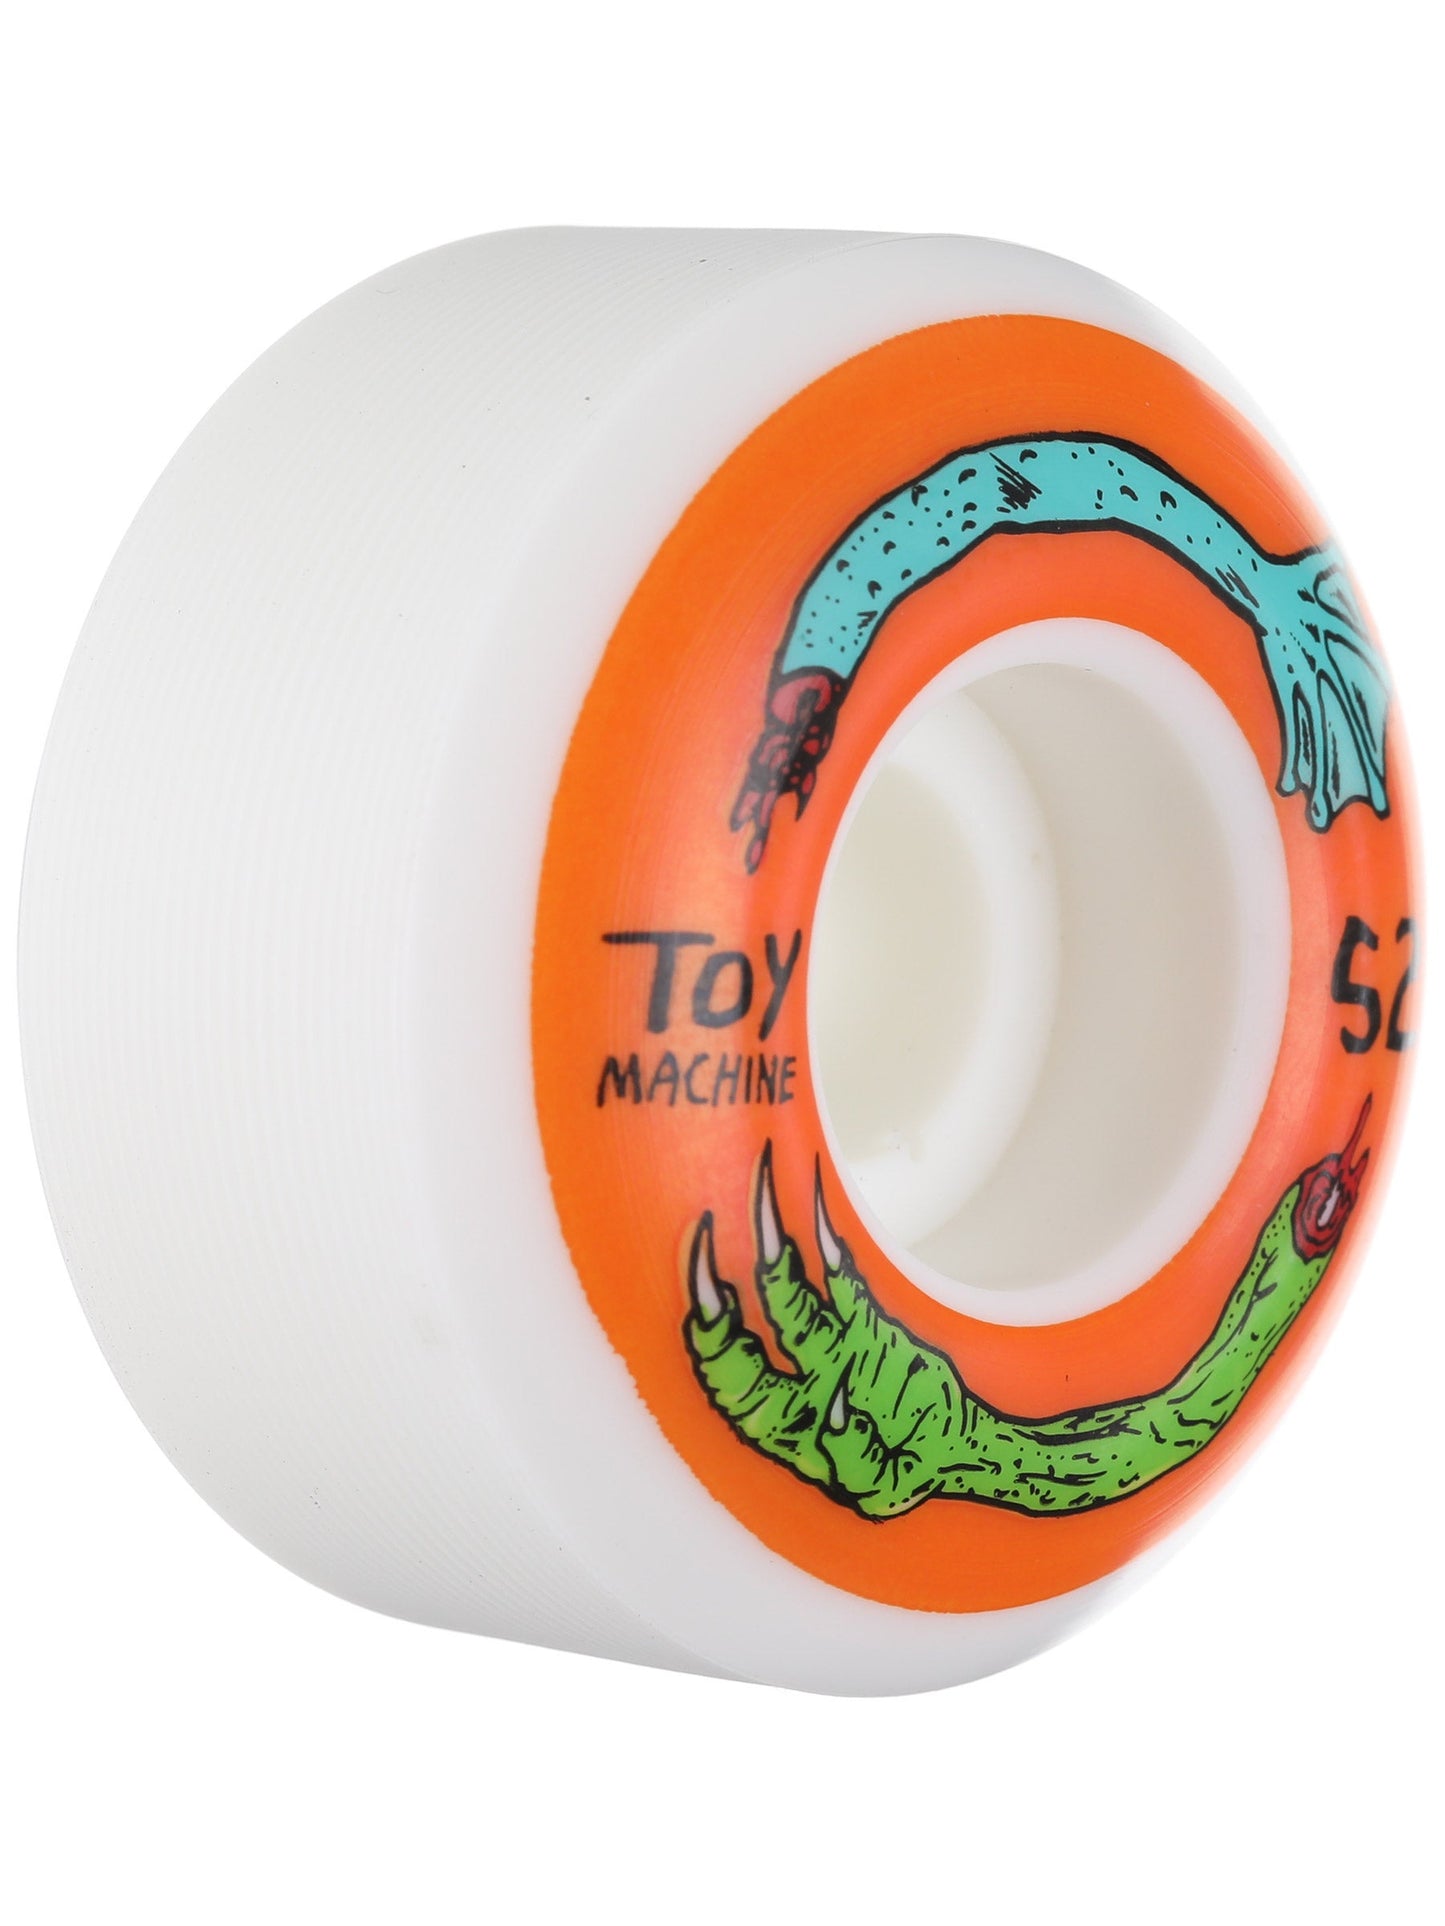 TOY MACHINE Fos Arms Wheels 52mm/99a